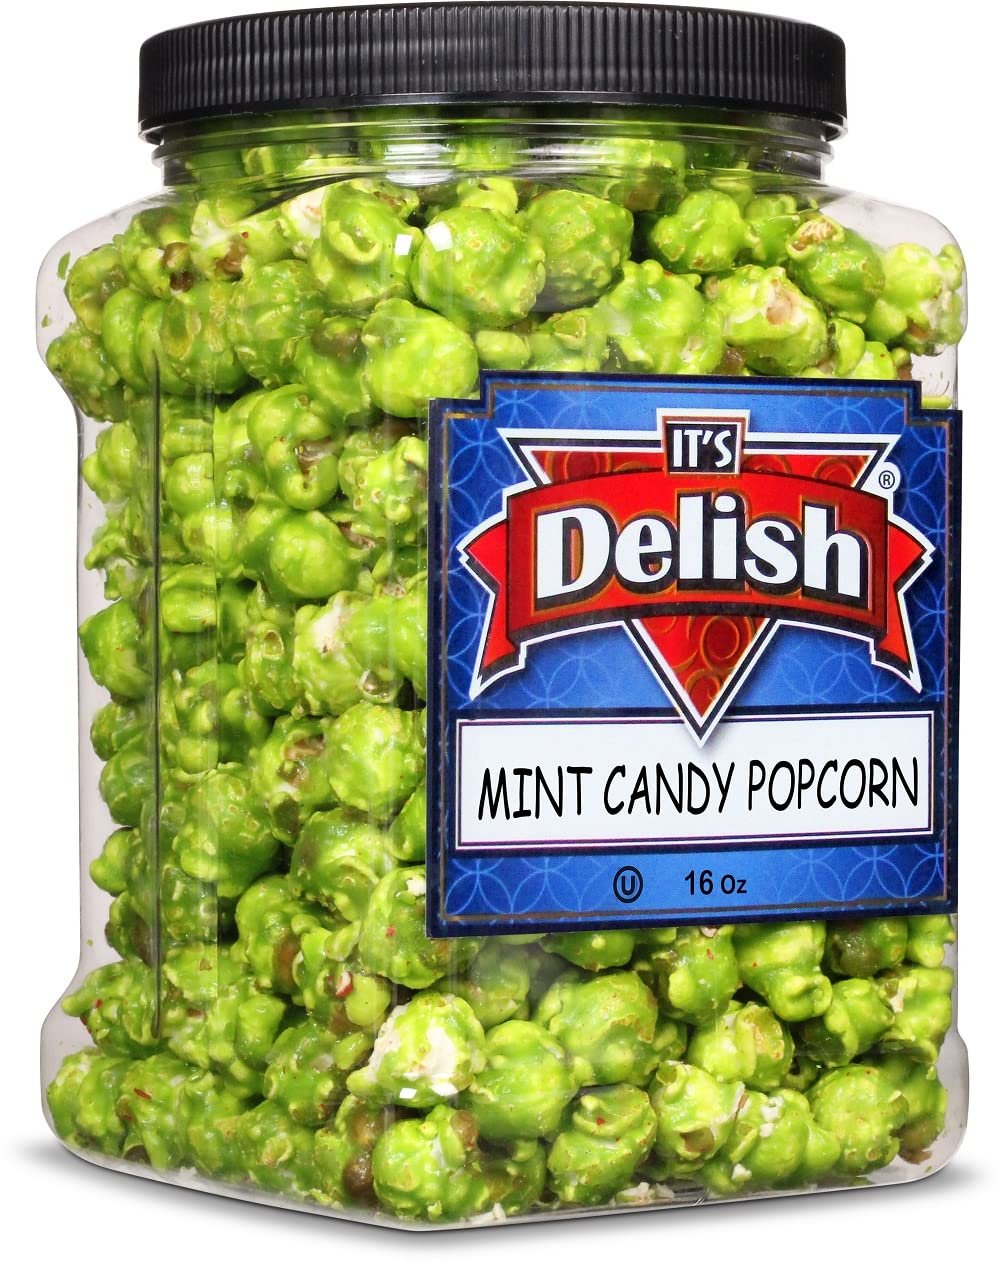 Mint Candy Popcorn, 16 Oz Jumbo Reusable Container